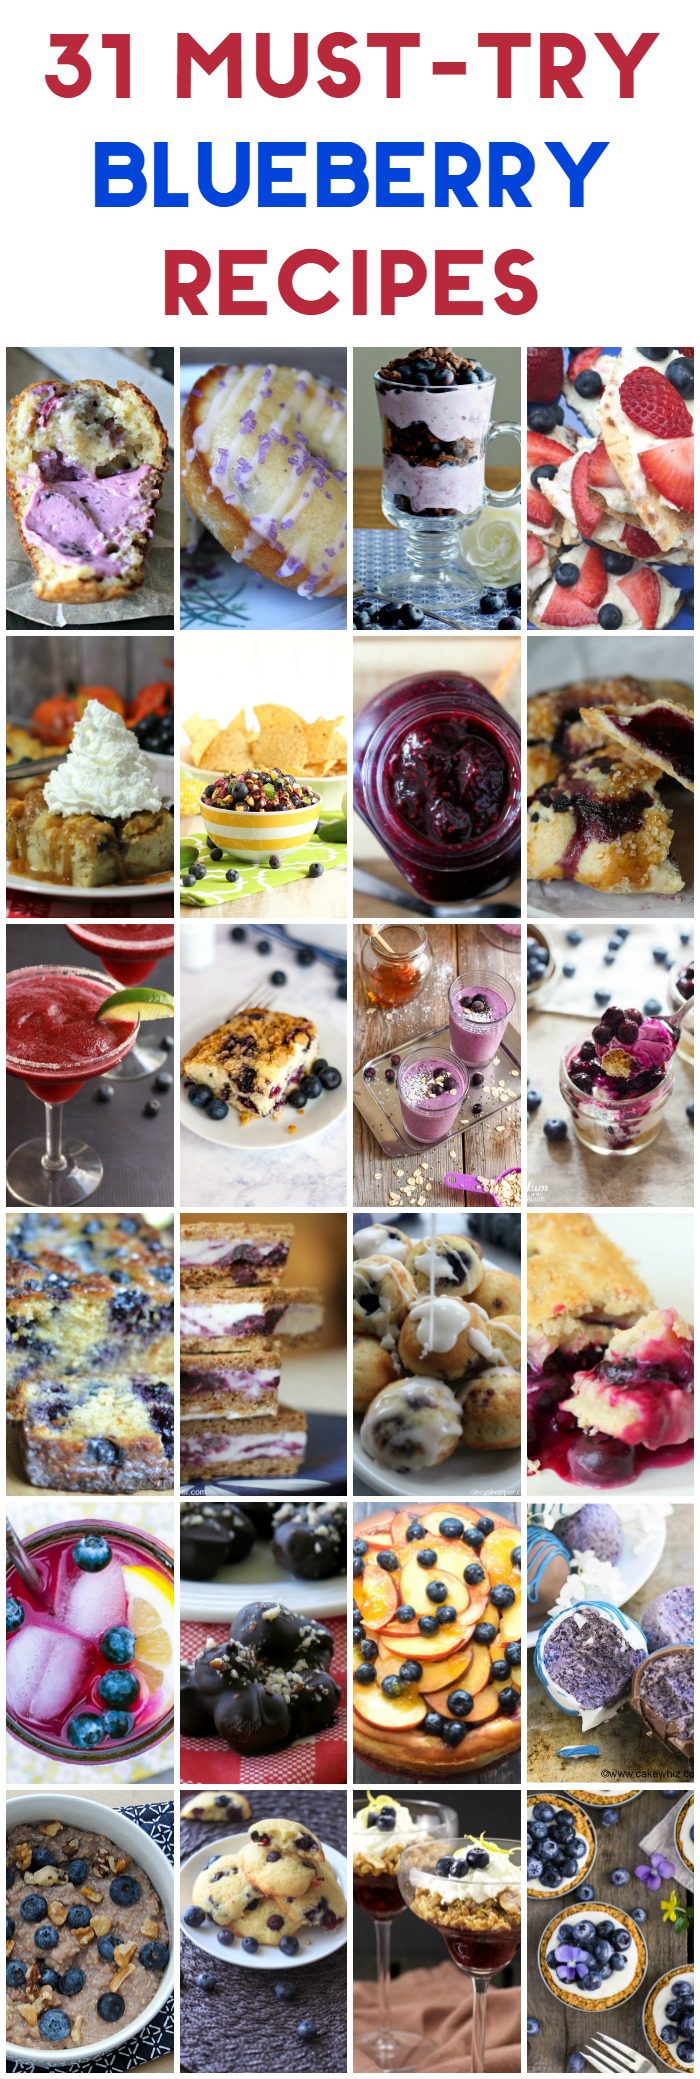 Celebrate summer's berry harvest with 31 delicious must-try blueberry recipes, plus check out a few amazing health benefits of this yummy little fruit!